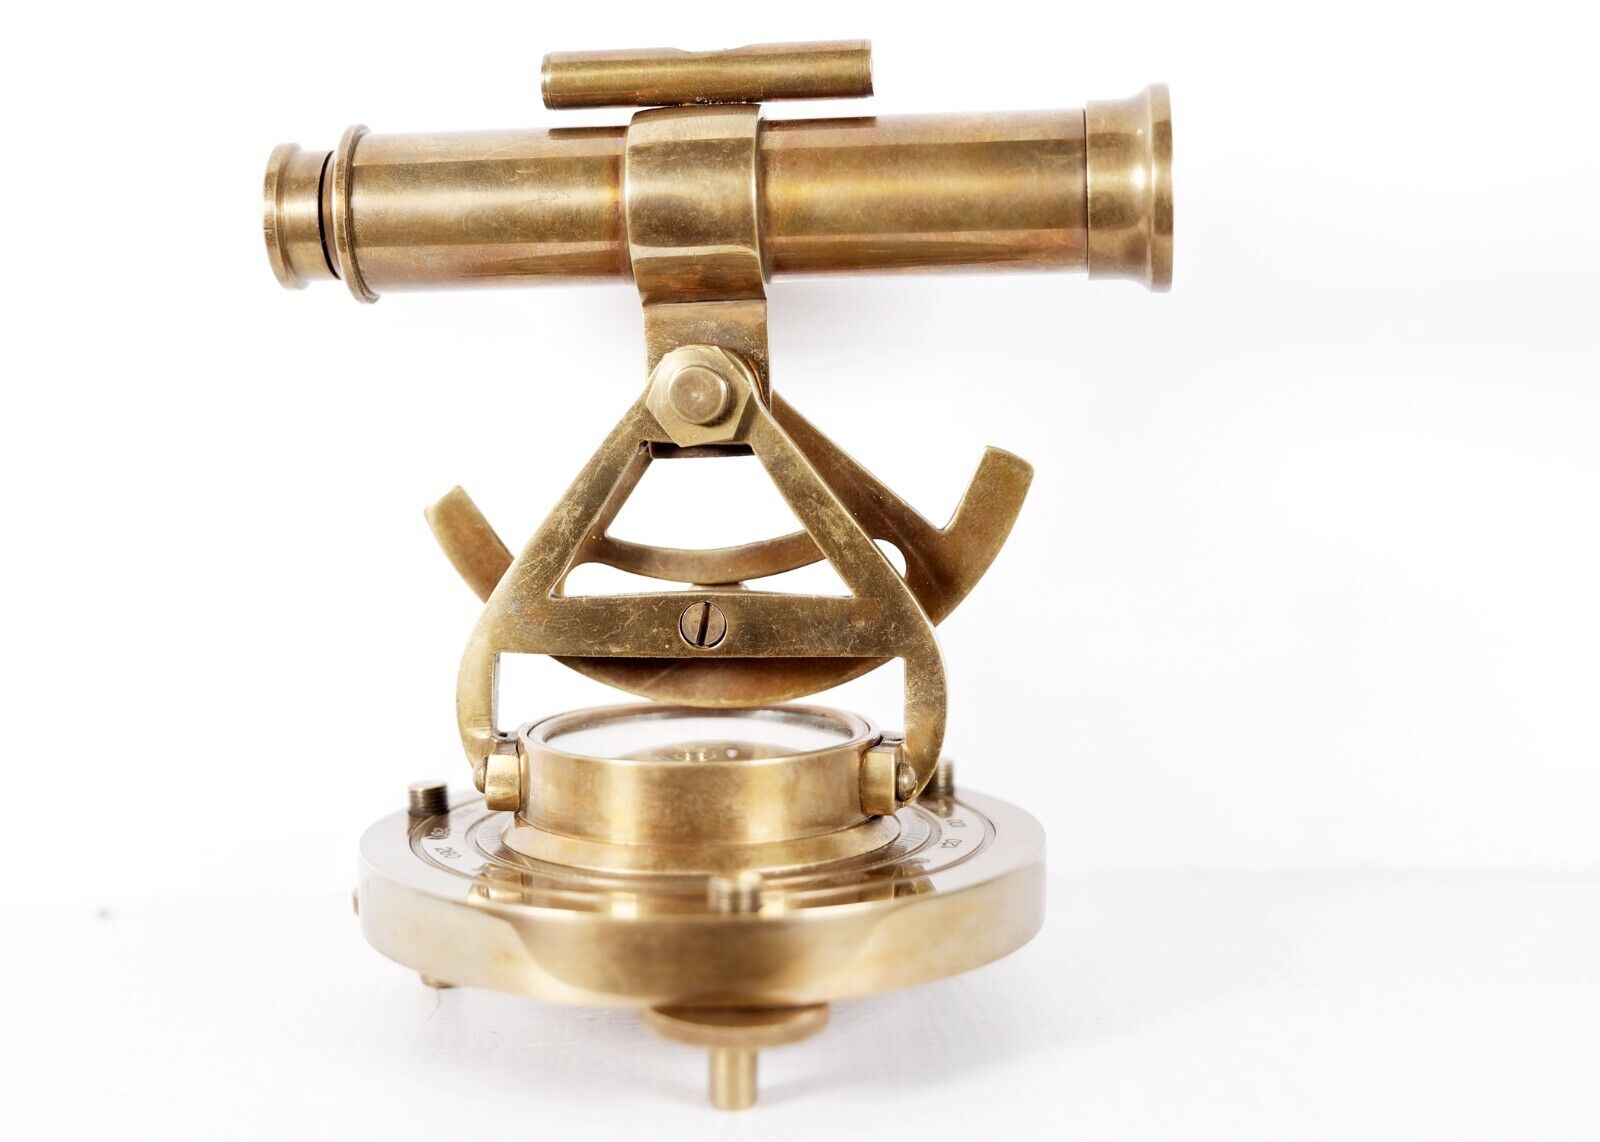 Antique Brass Alidade Compass With Theodolite Telescope For Survey Instrument